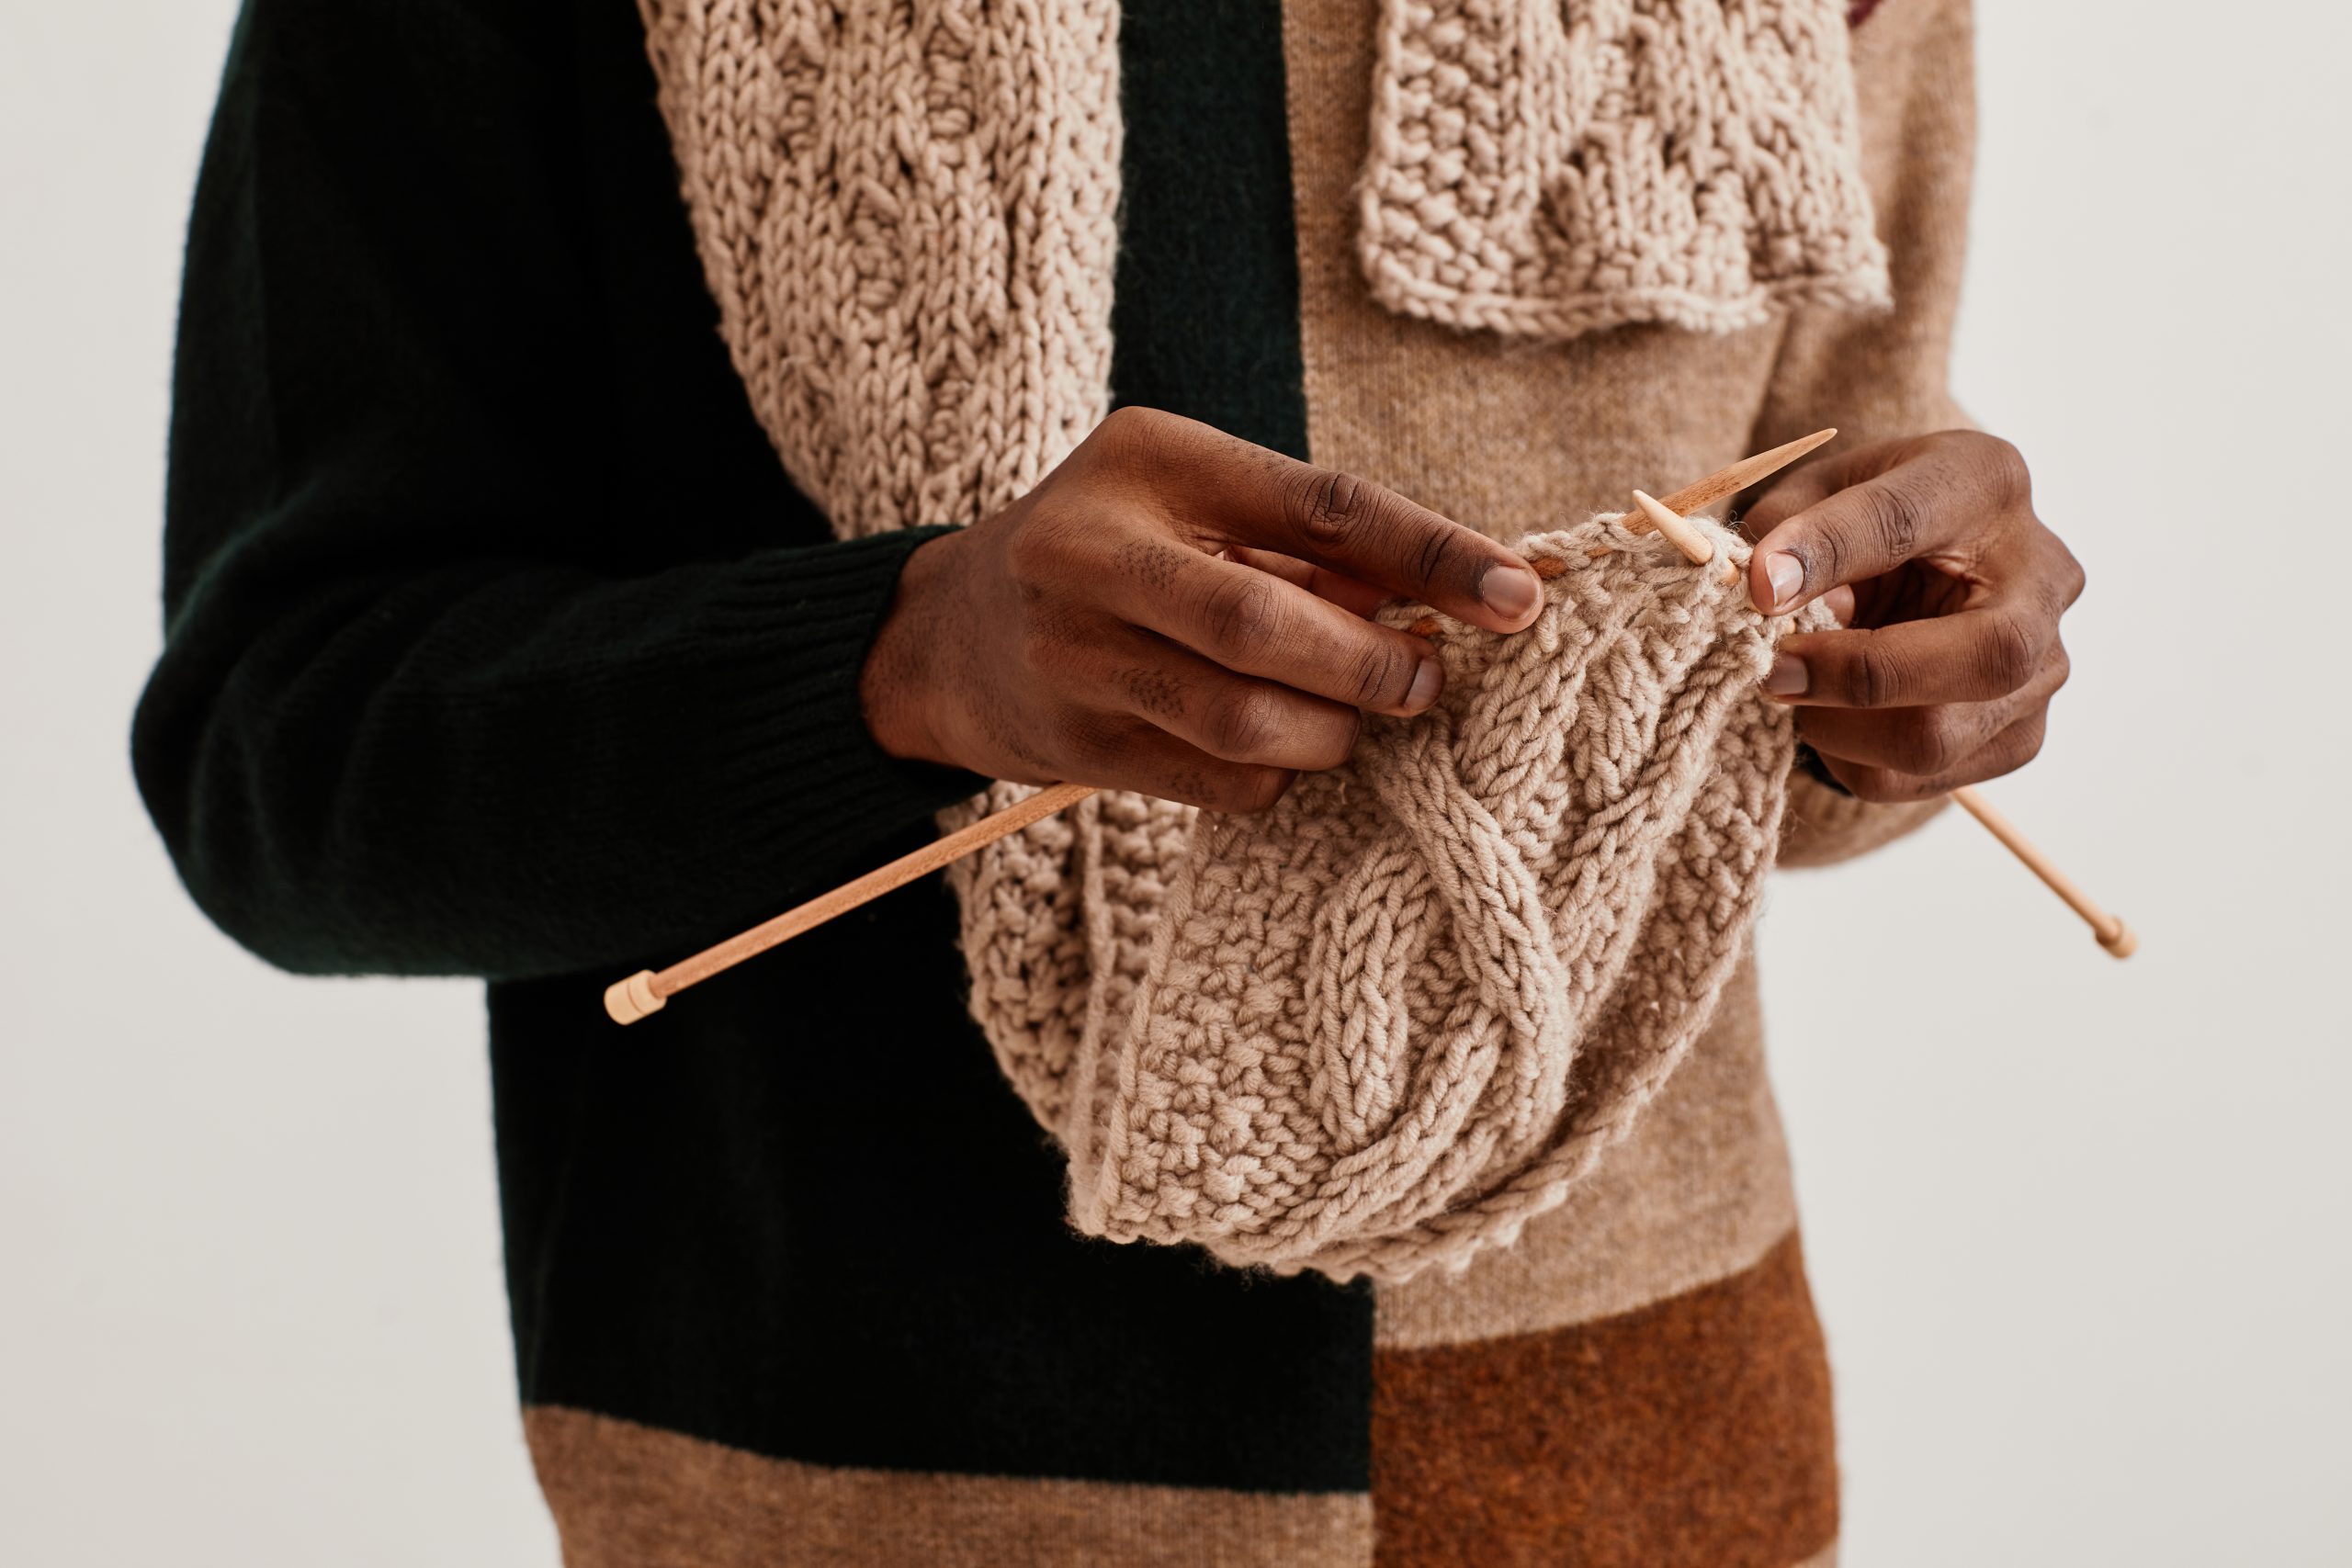 Those With Anxiety, Depression Turning to Knitting